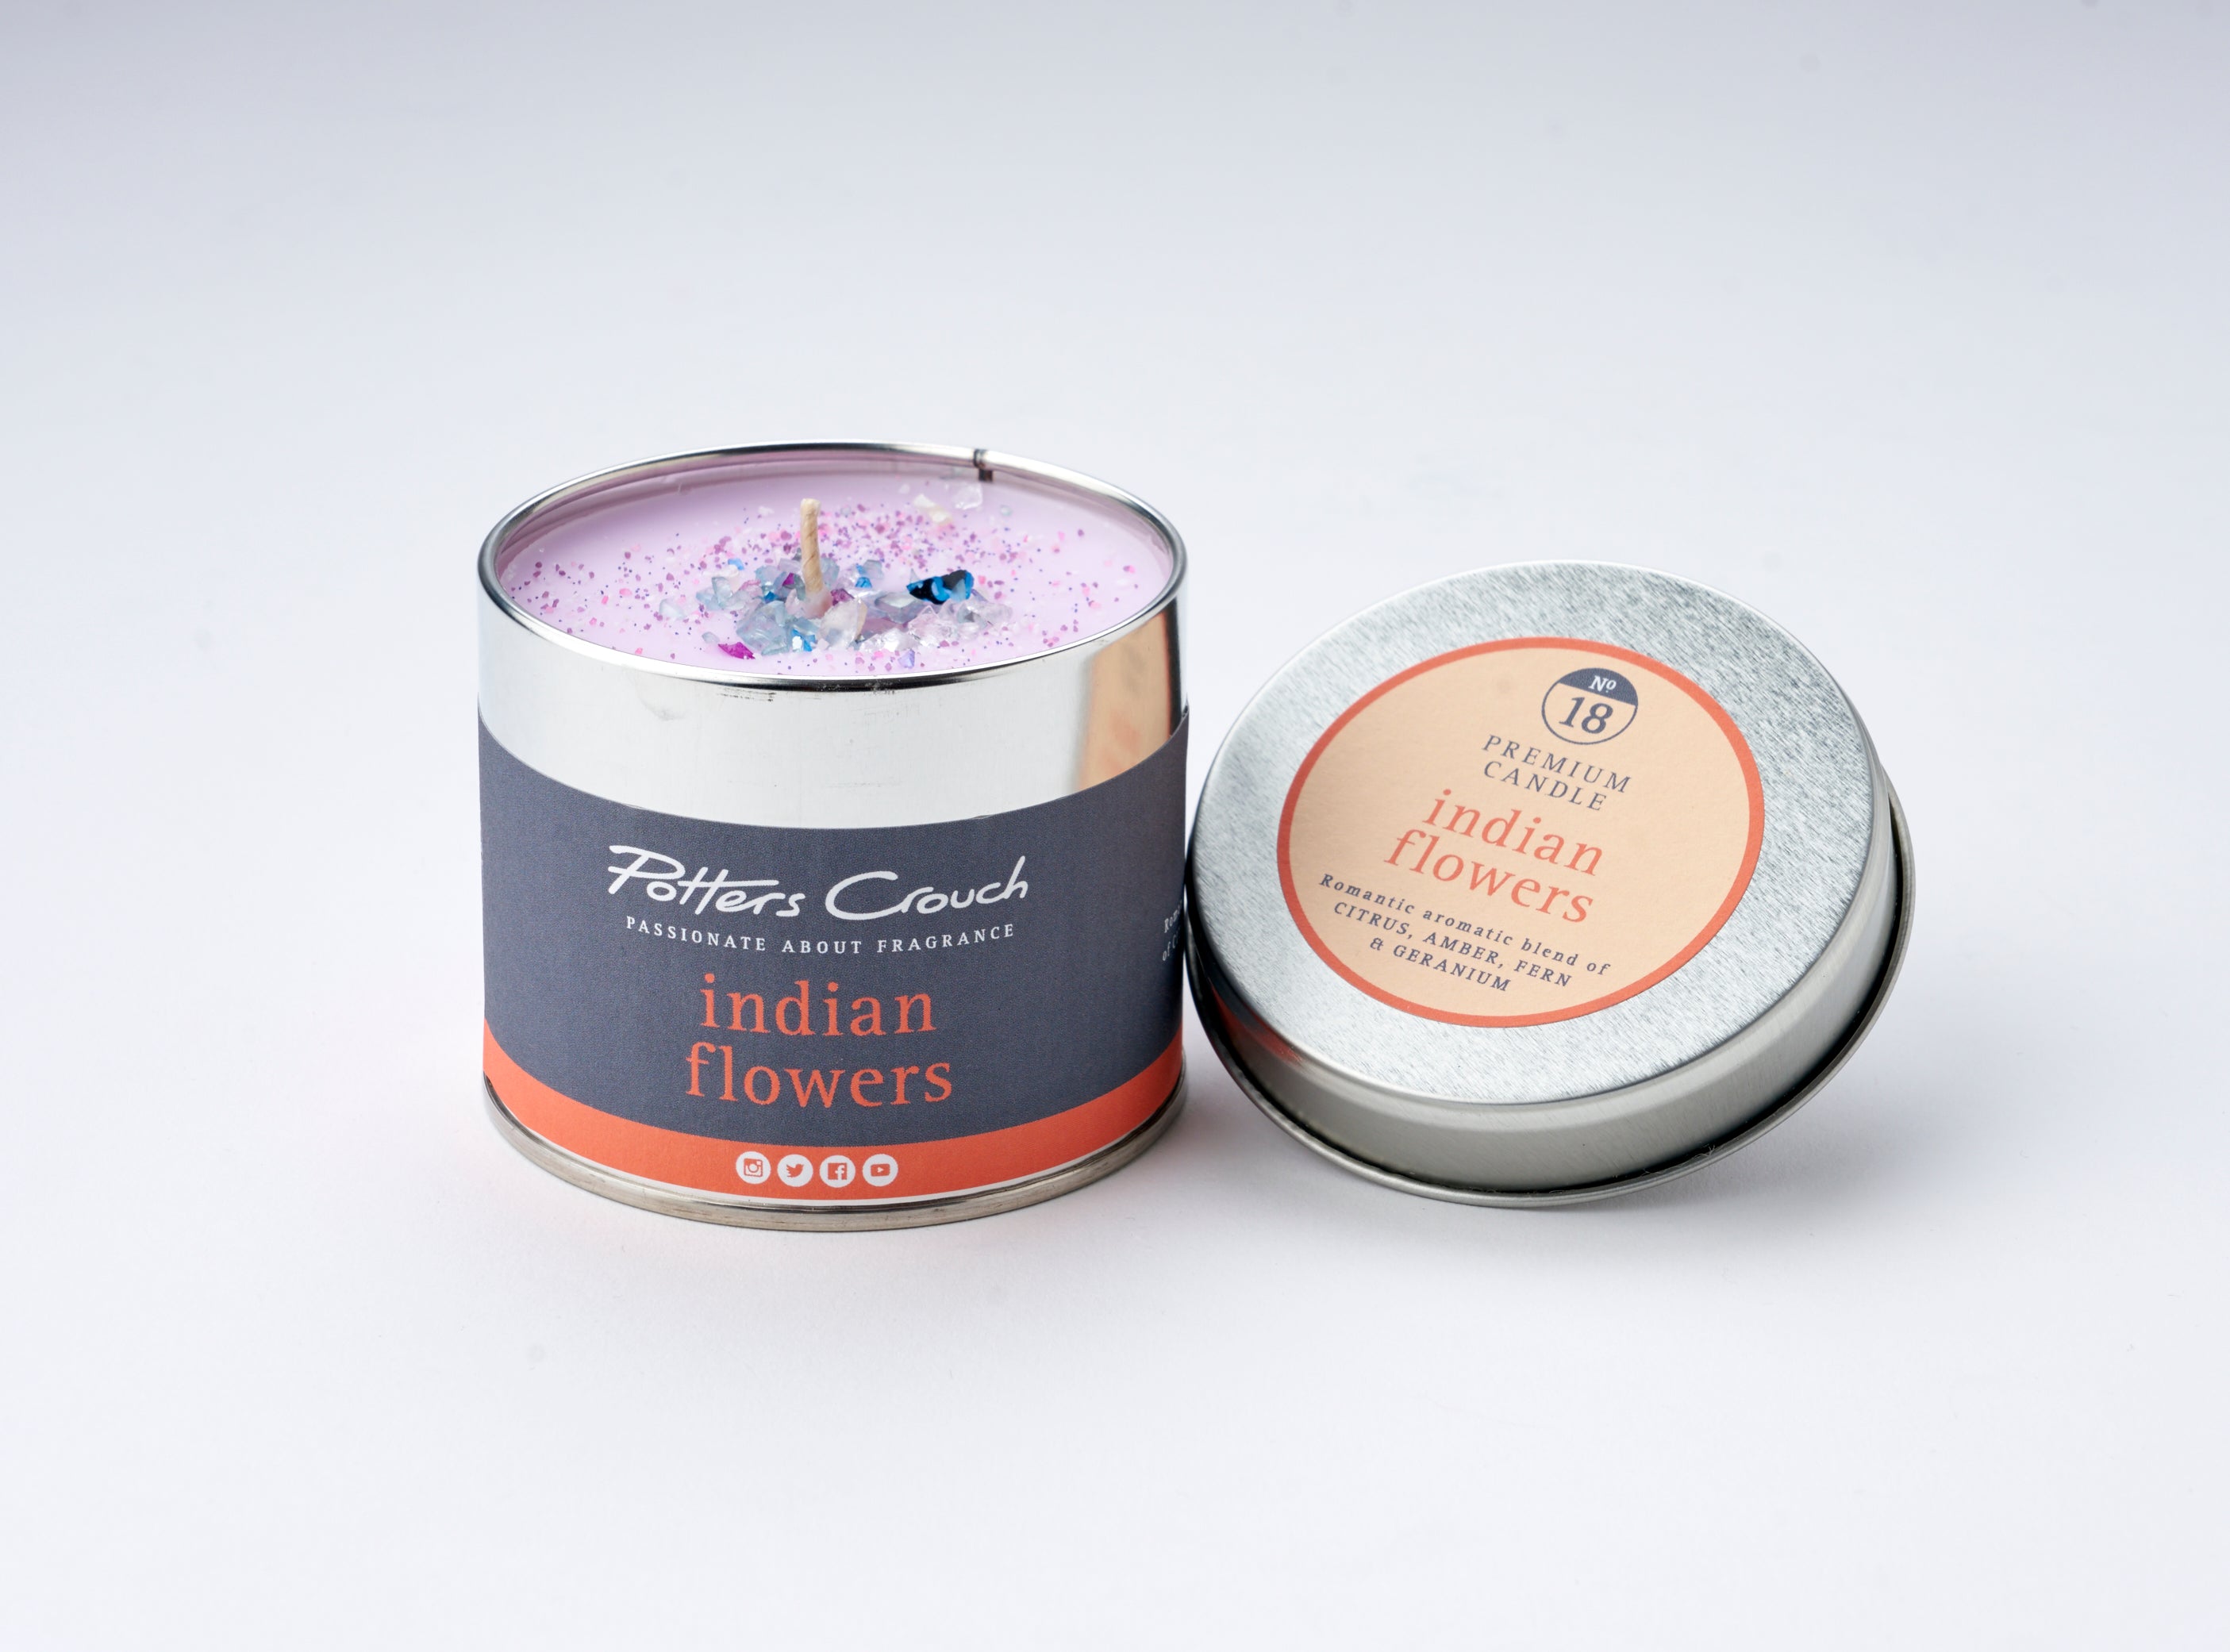 Indian Flowers - Scented Candle in a Tin - Potters Crouch